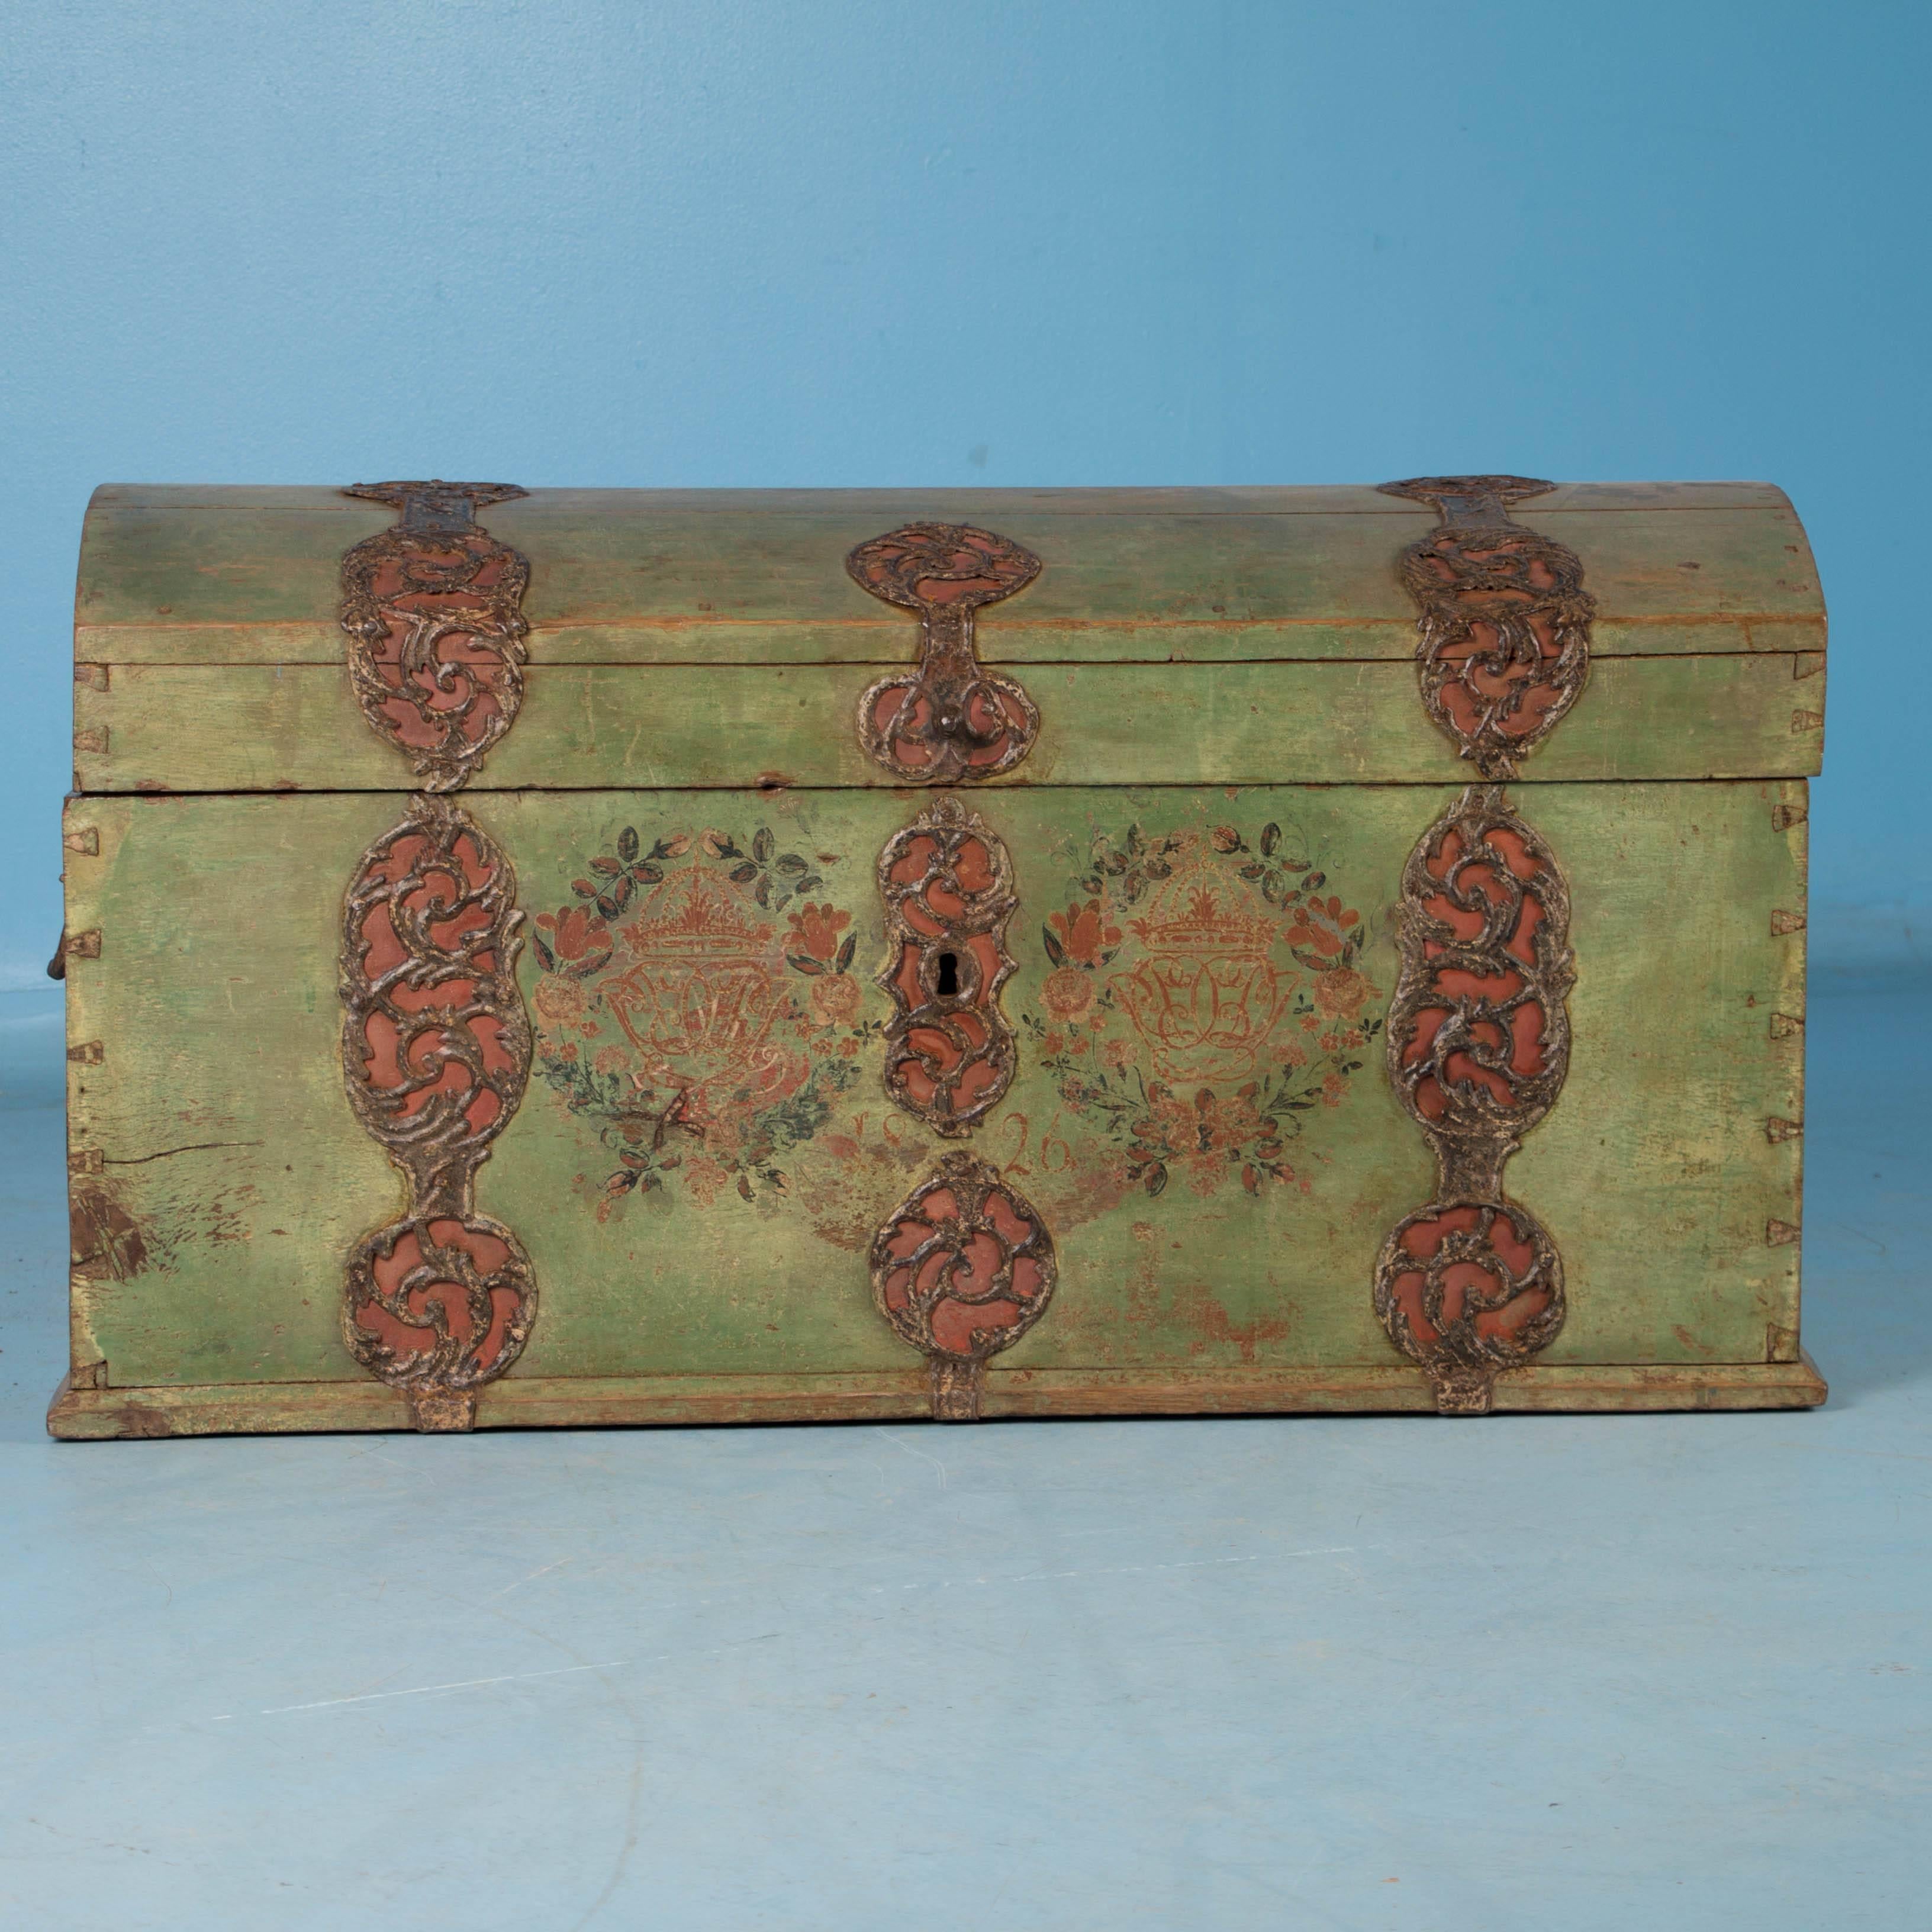 The trunk is dated 1826 below a painted flourish of floral wreaths and monograms over the original time worn green background. The ornate decorative strap and hinges seem to encircle the trunk and set this chest apart from others. Made of heavy oak